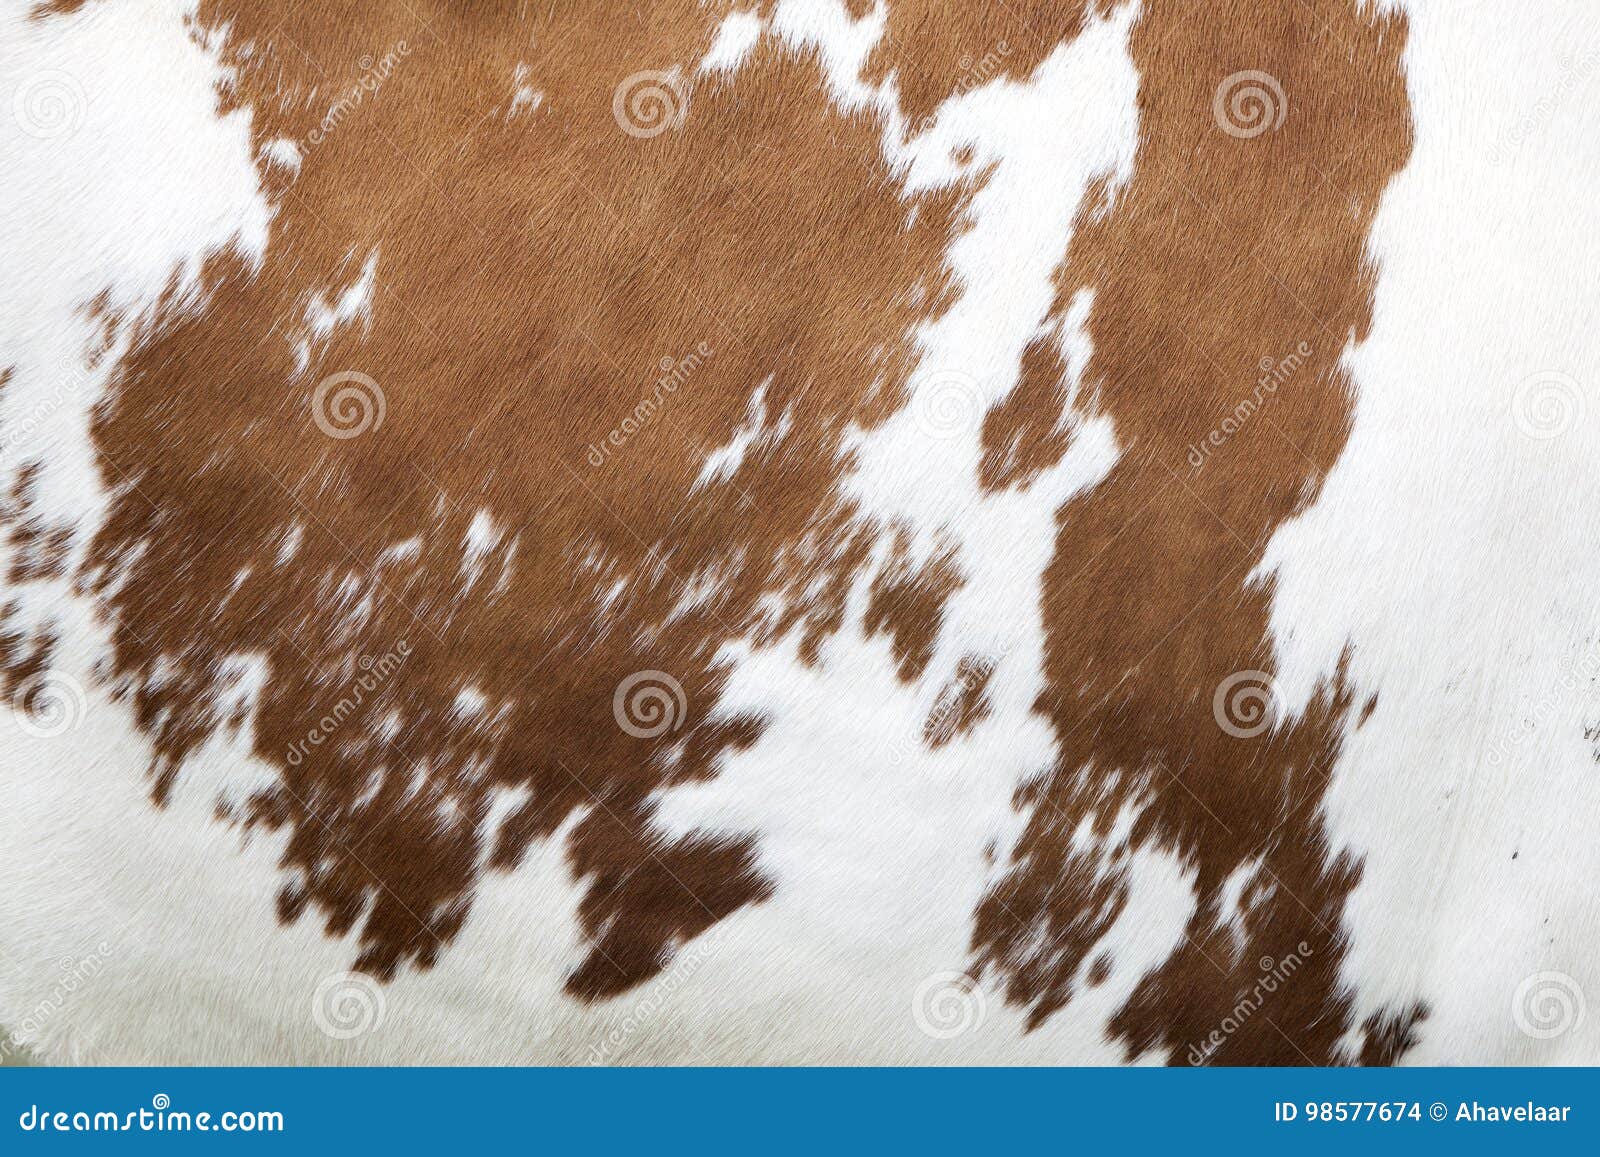 Red And White Pattern On Cowhide Stock Photo Image Of Animal